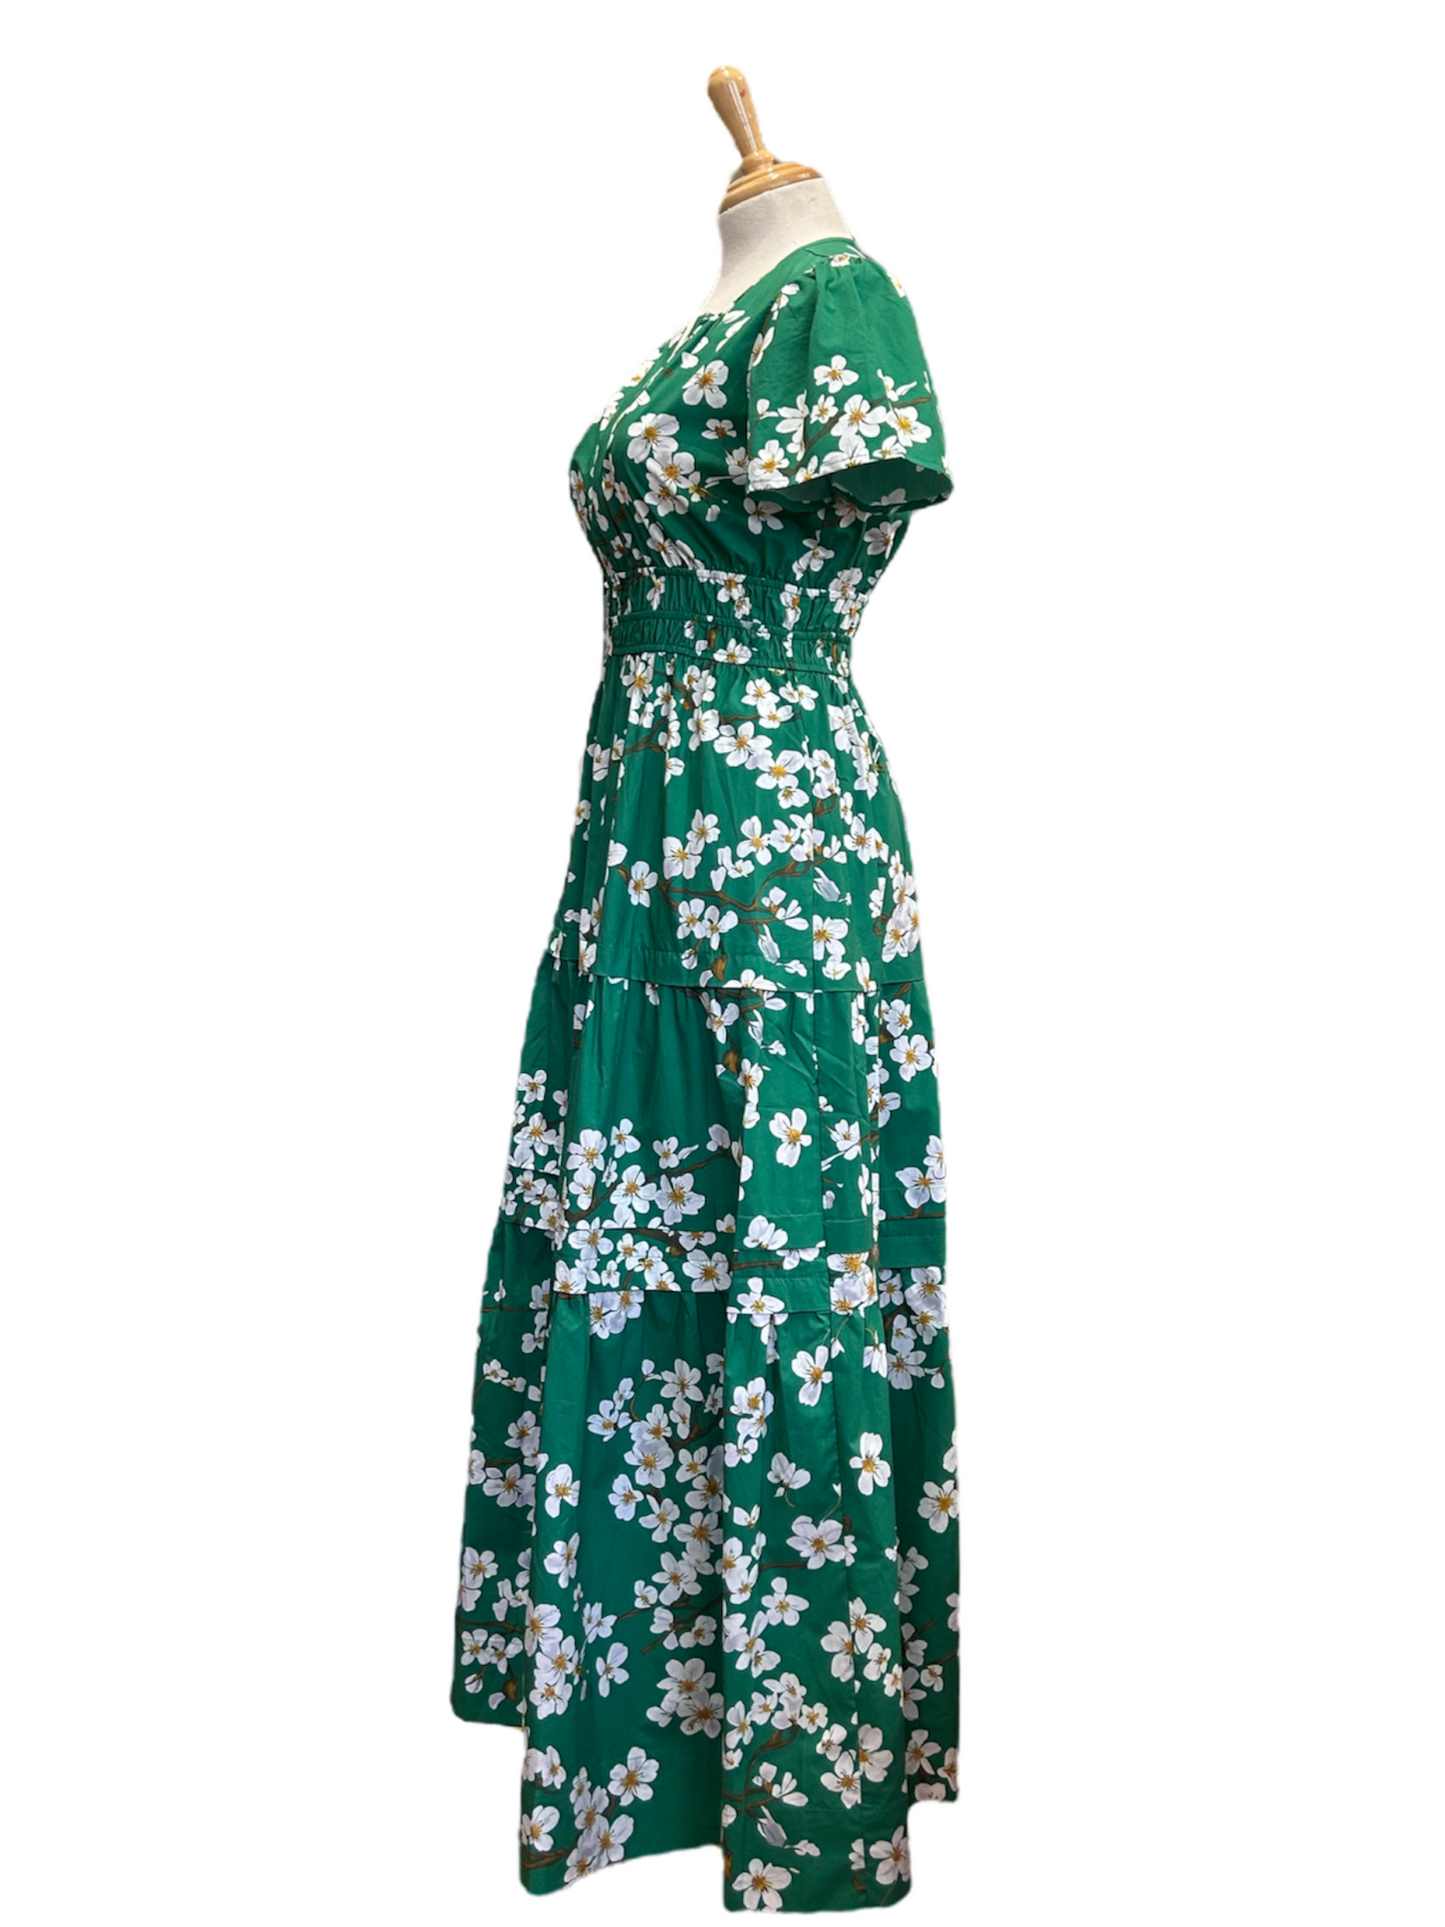 Hanna Dress - Blossom Green (Size 16 ONLY)